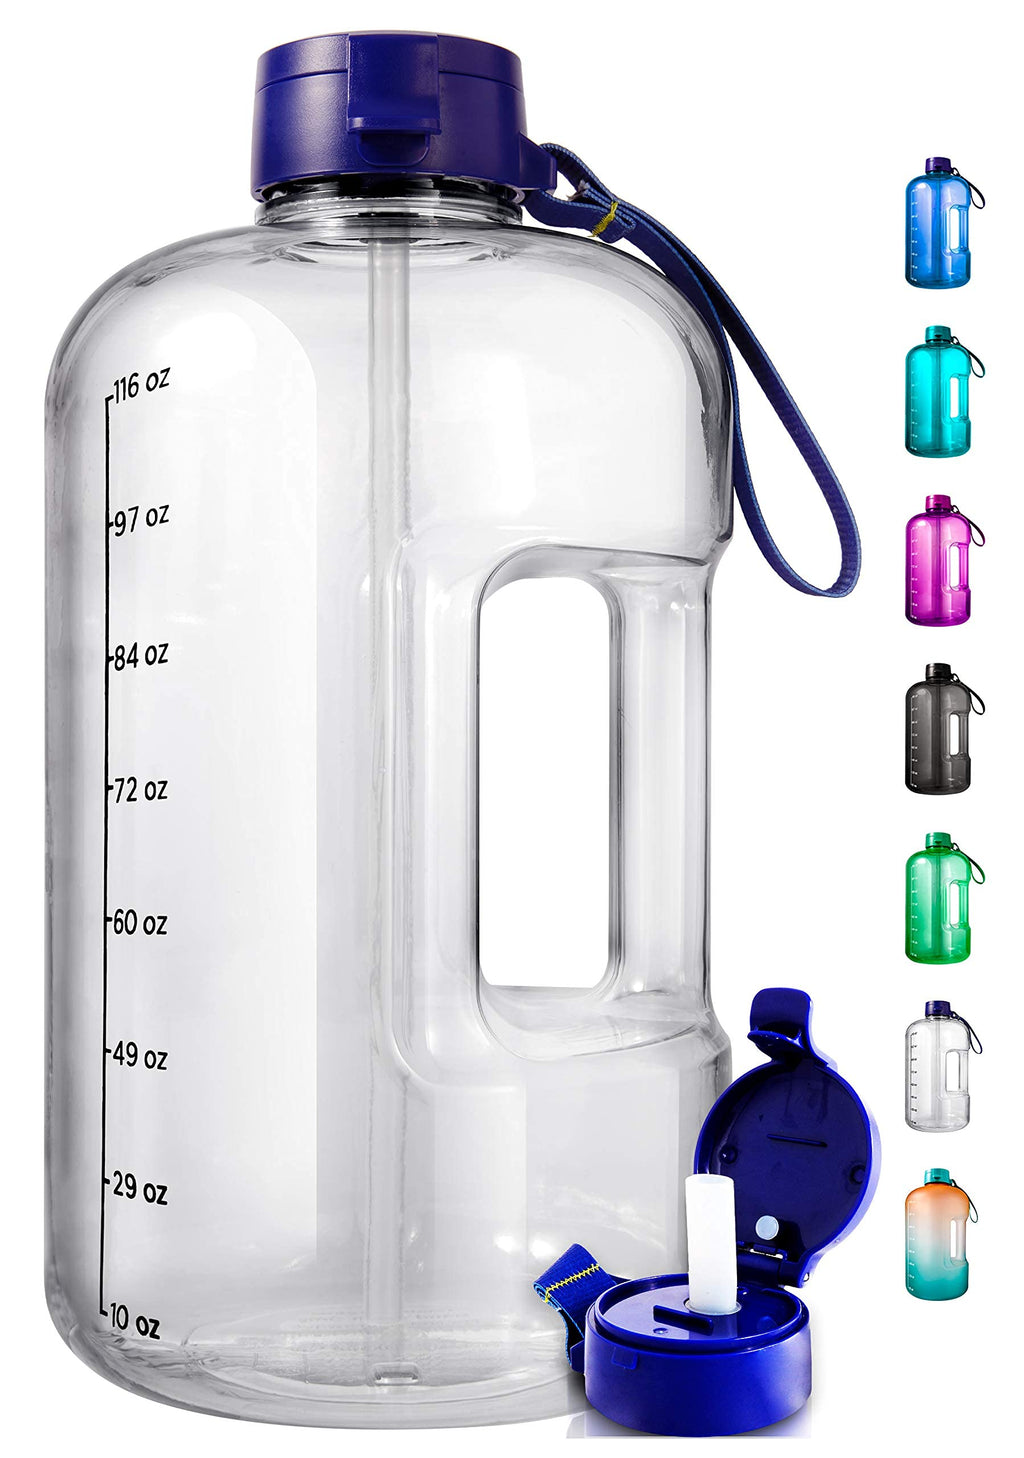 1 Gallon Water Bottle With Time Marker - Large Water Bottle Gallon Water Bottle Motivational One Gallon Water Bottle With Straw 1 Gallon Water Jug With Time Marker 1 Gallon Big Water Bottle Clear